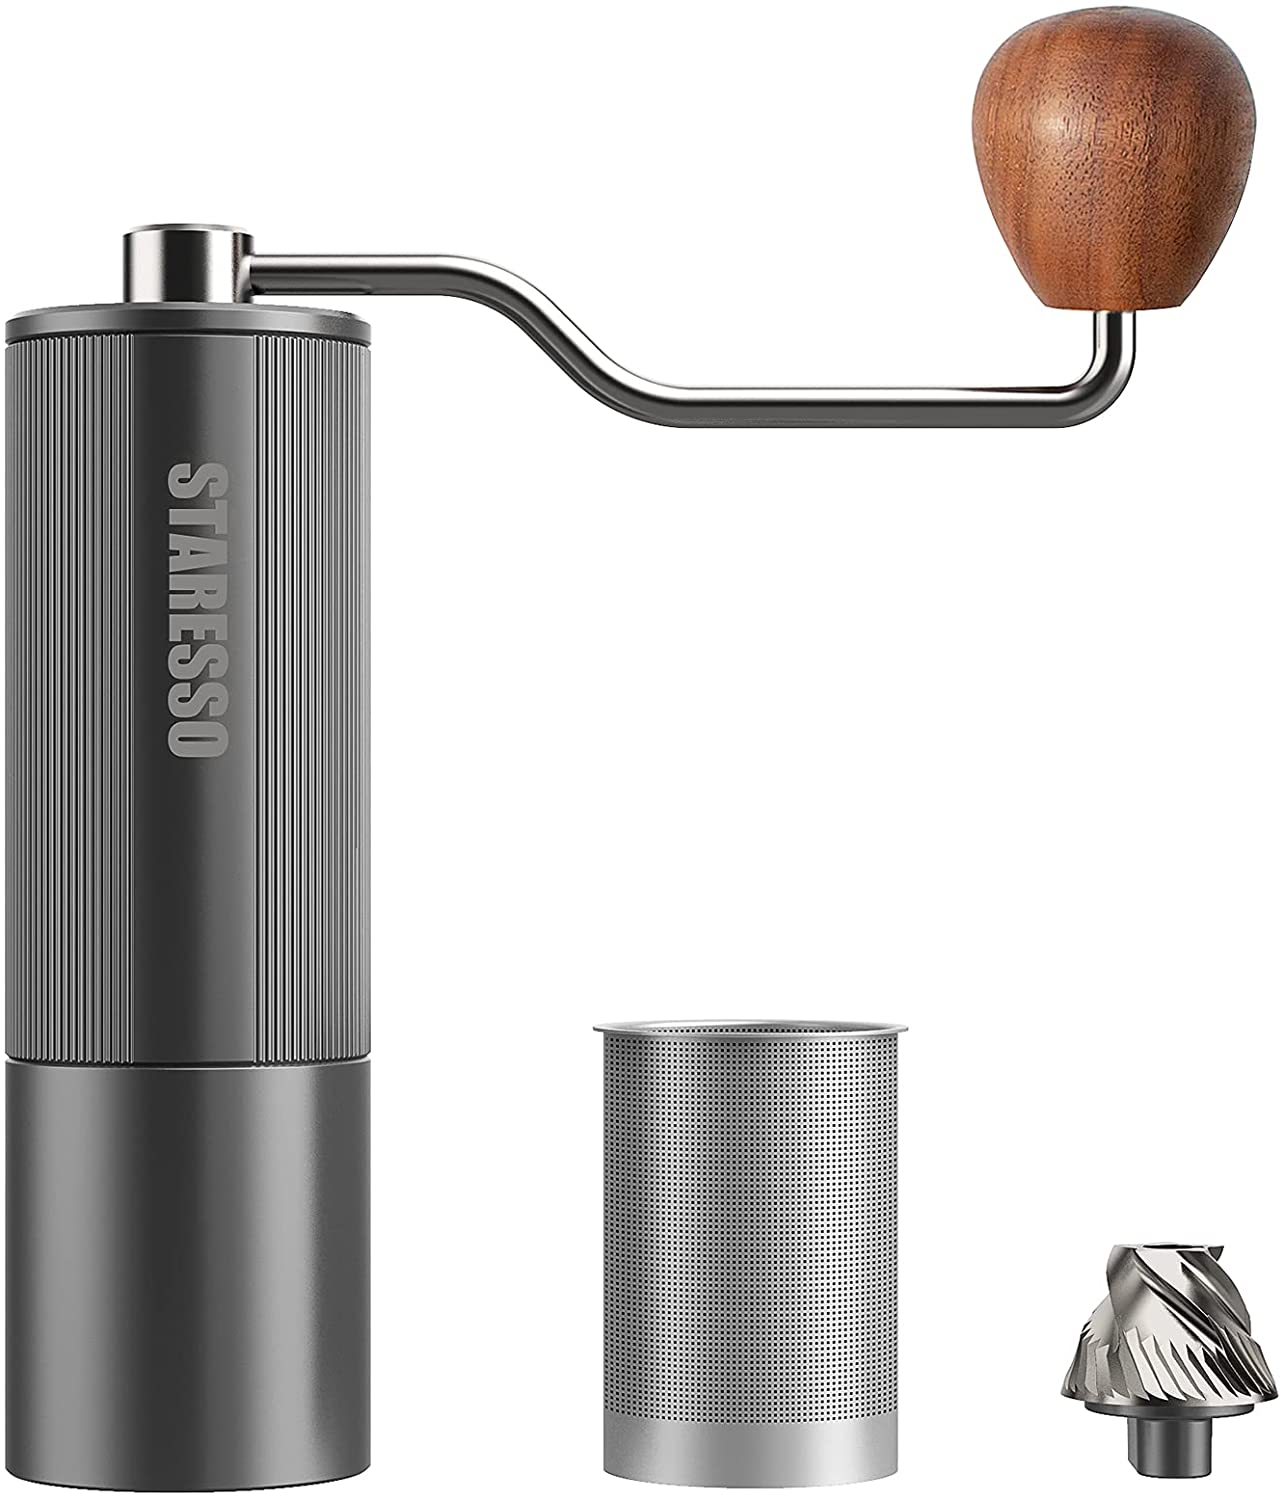 STARESSO Manual Coffee Grinder Stainless Steel Grinder Aluminium Alloy High Quality Adjustable Hand Coffee Grinder with Coffee Filter Walnut Handle Espresso Grinder Hand Mill